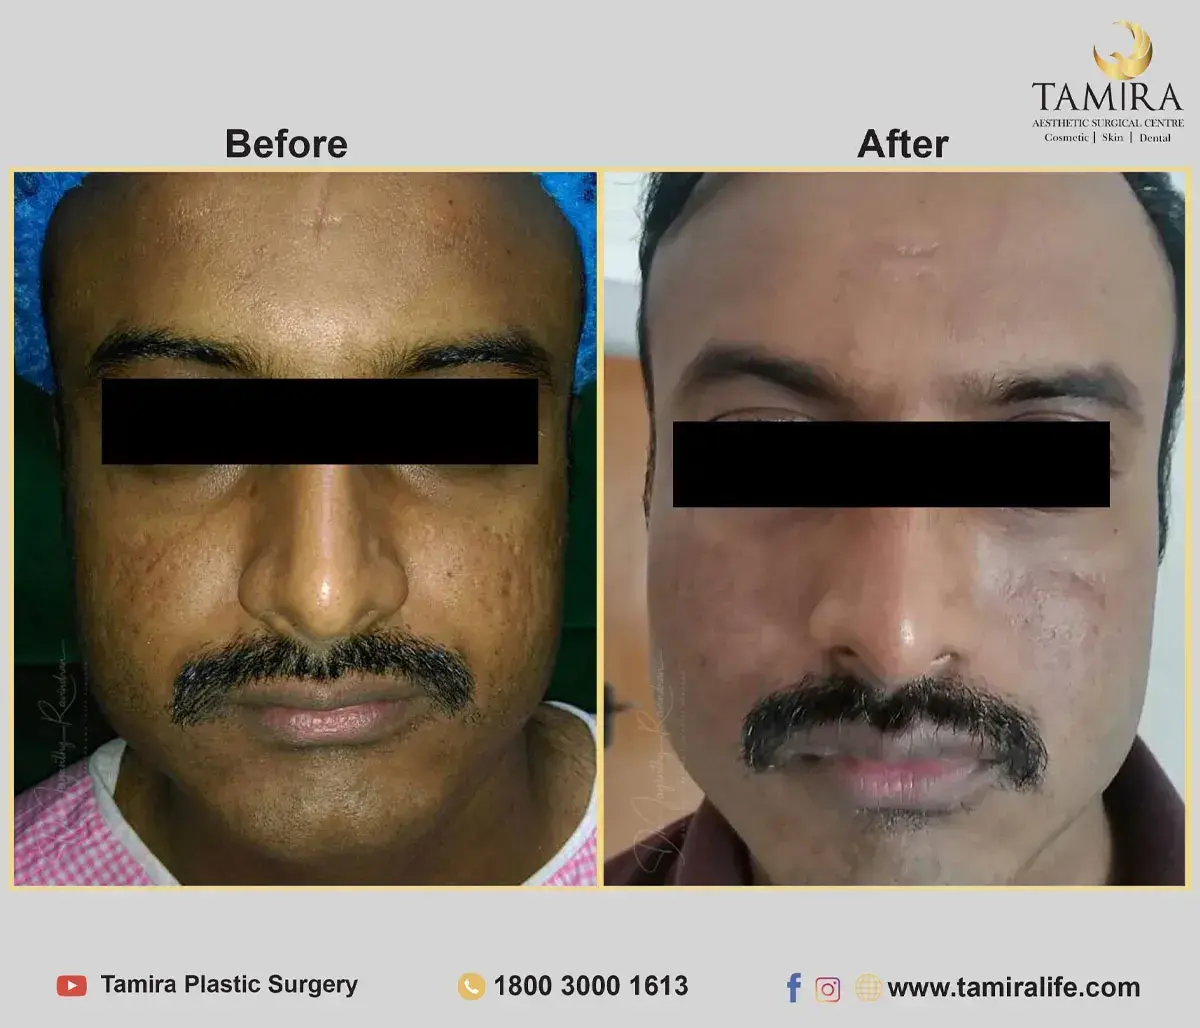 Facelift Surgery with Fat Grafting - Before & After